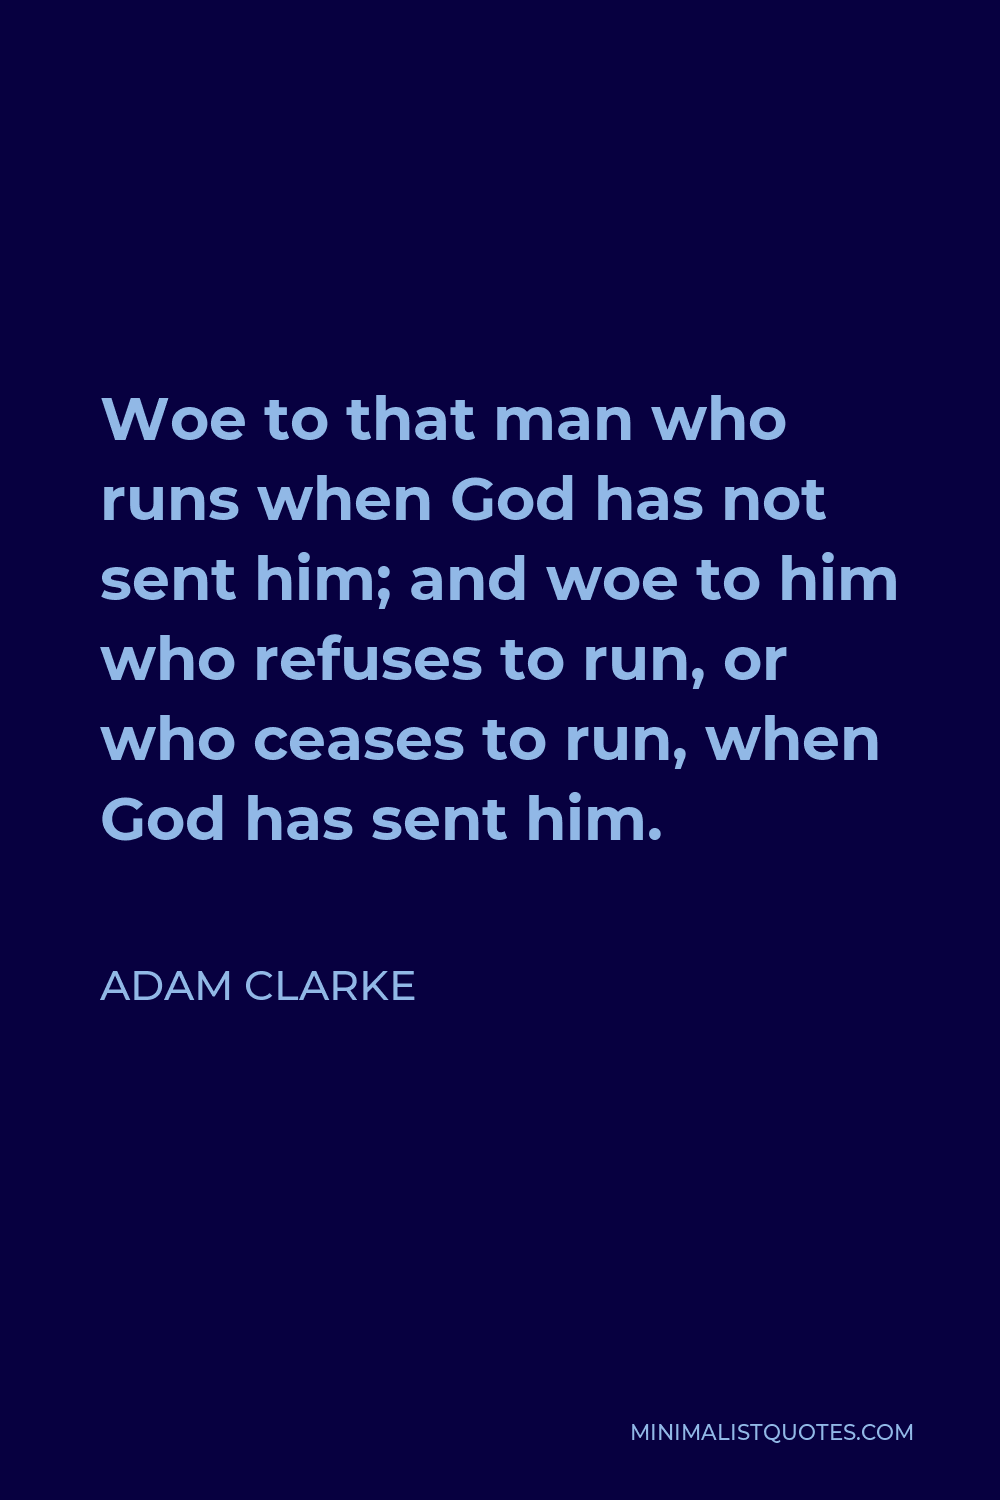 Adam Clarke Quote - Woe to that man who runs when God has not sent him; and woe to him who refuses to run, or who ceases to run, when God has sent him.